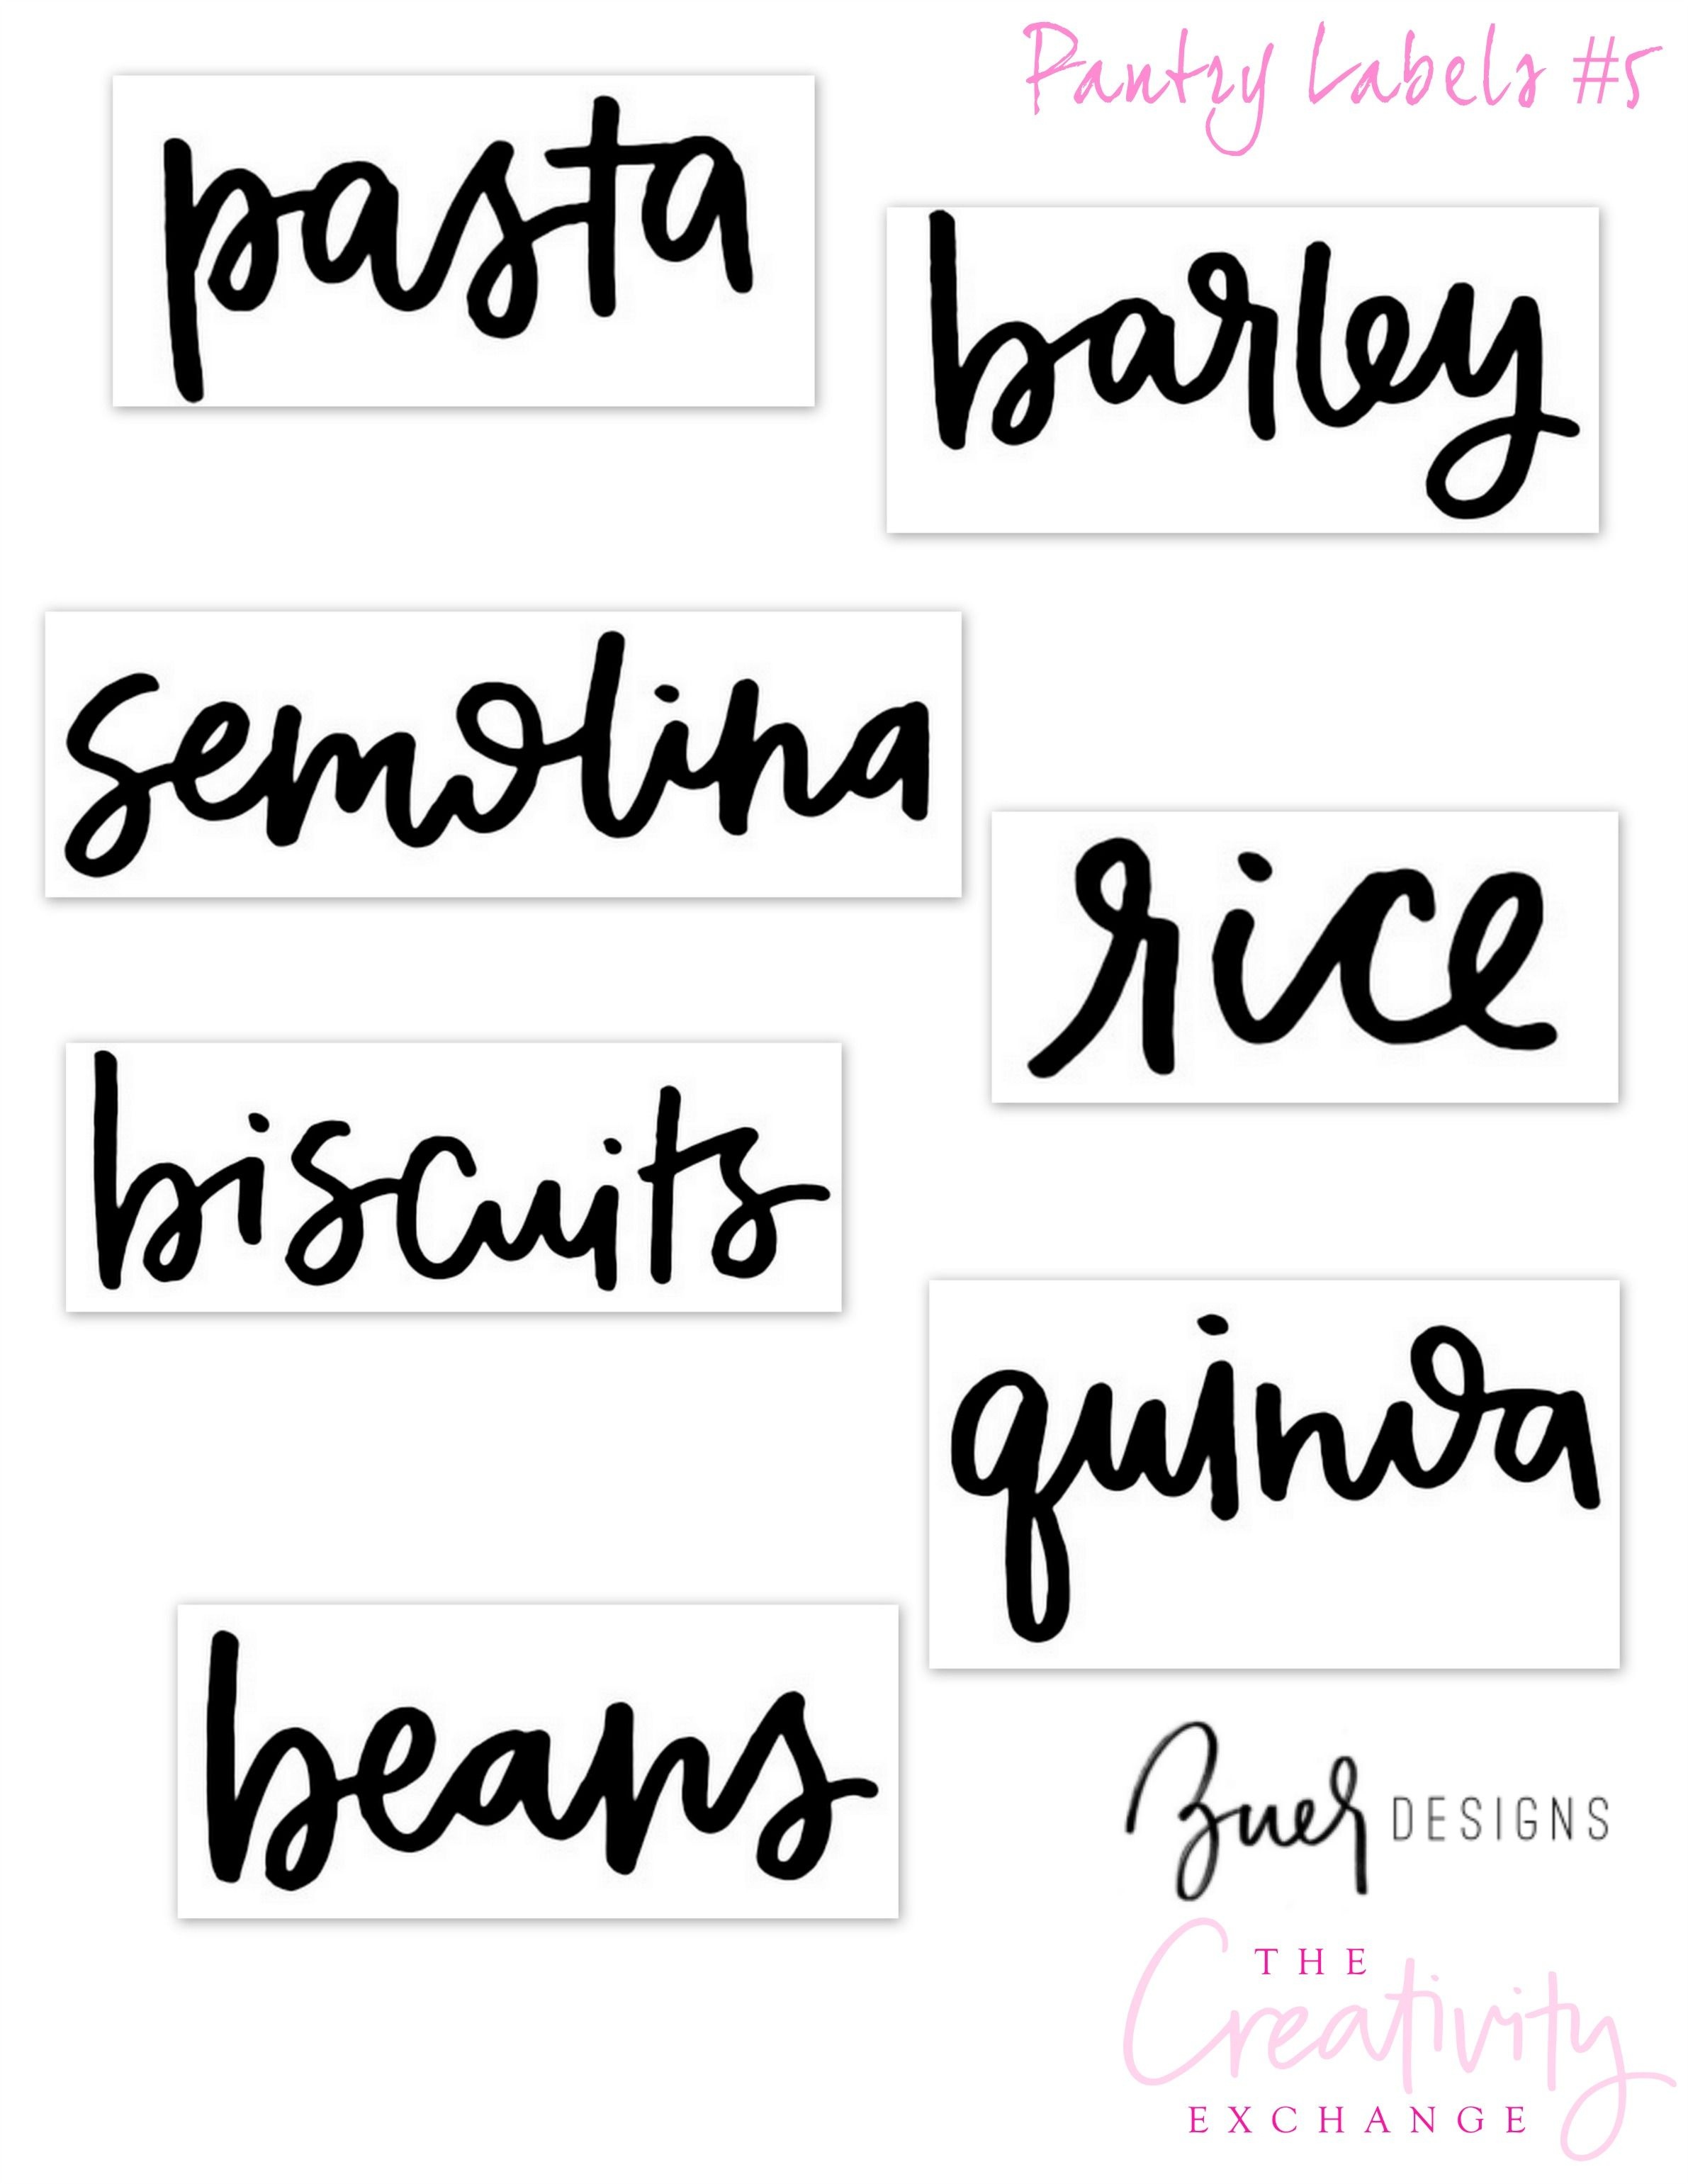 Free Printable Pantry Labels Hand Letteredzuer Designs. Print On - Free Printable From The Kitchen Of Labels